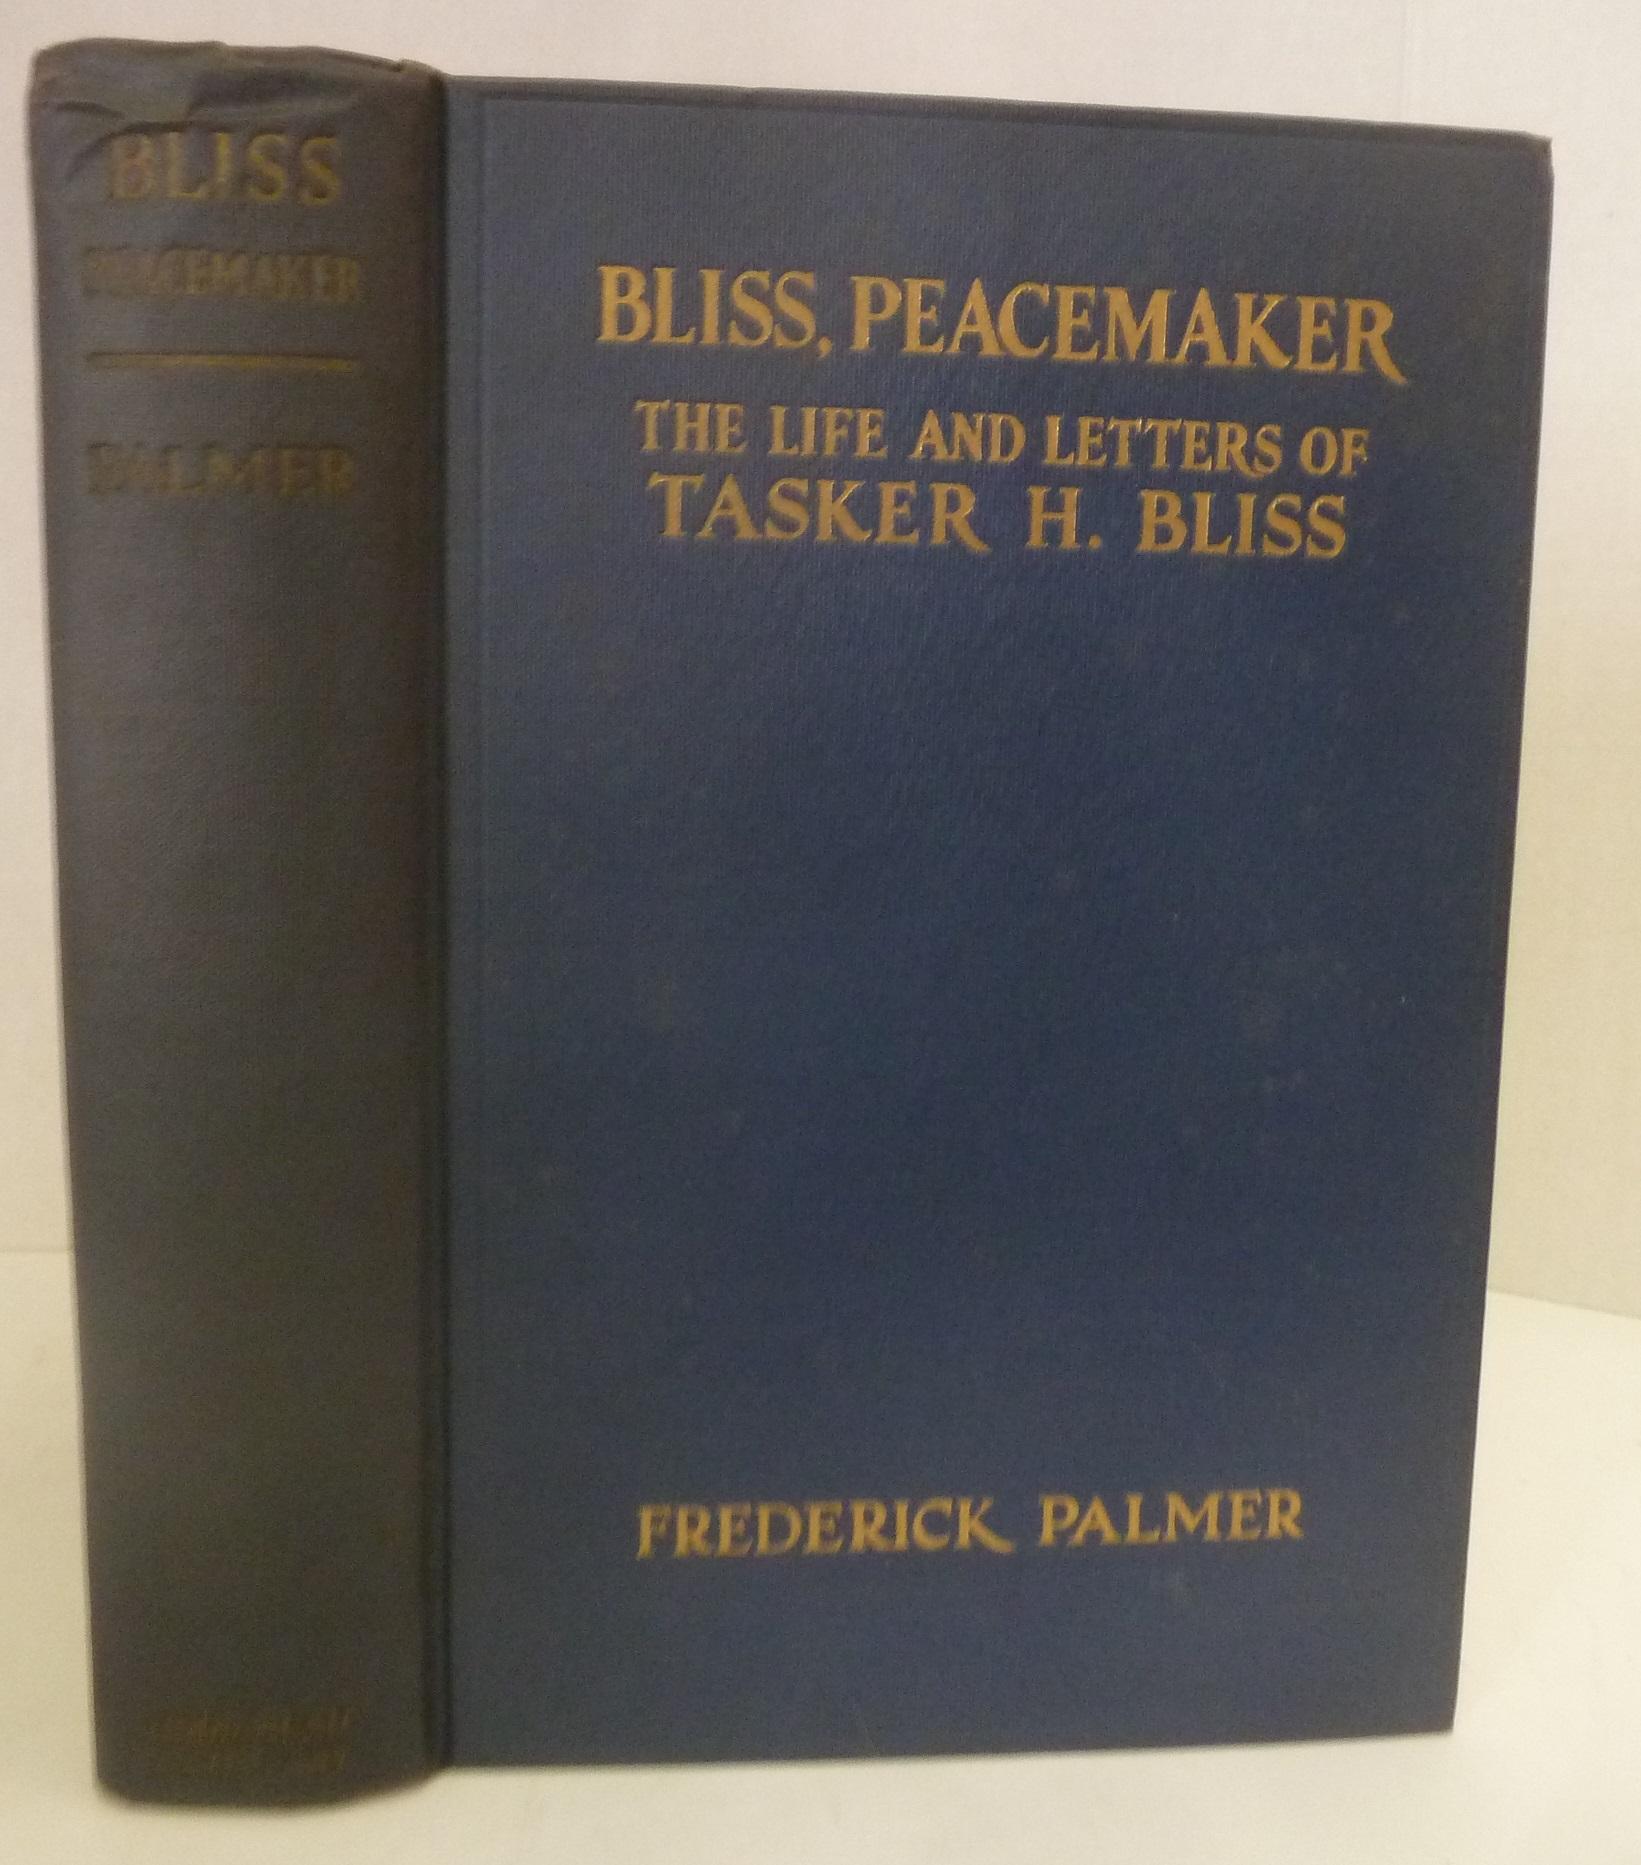 Bliss, Peacemaker: The Life And Letters Of Tasker H. Bliss Palmer, Frederick: Very Good- Hardcover (1932) |